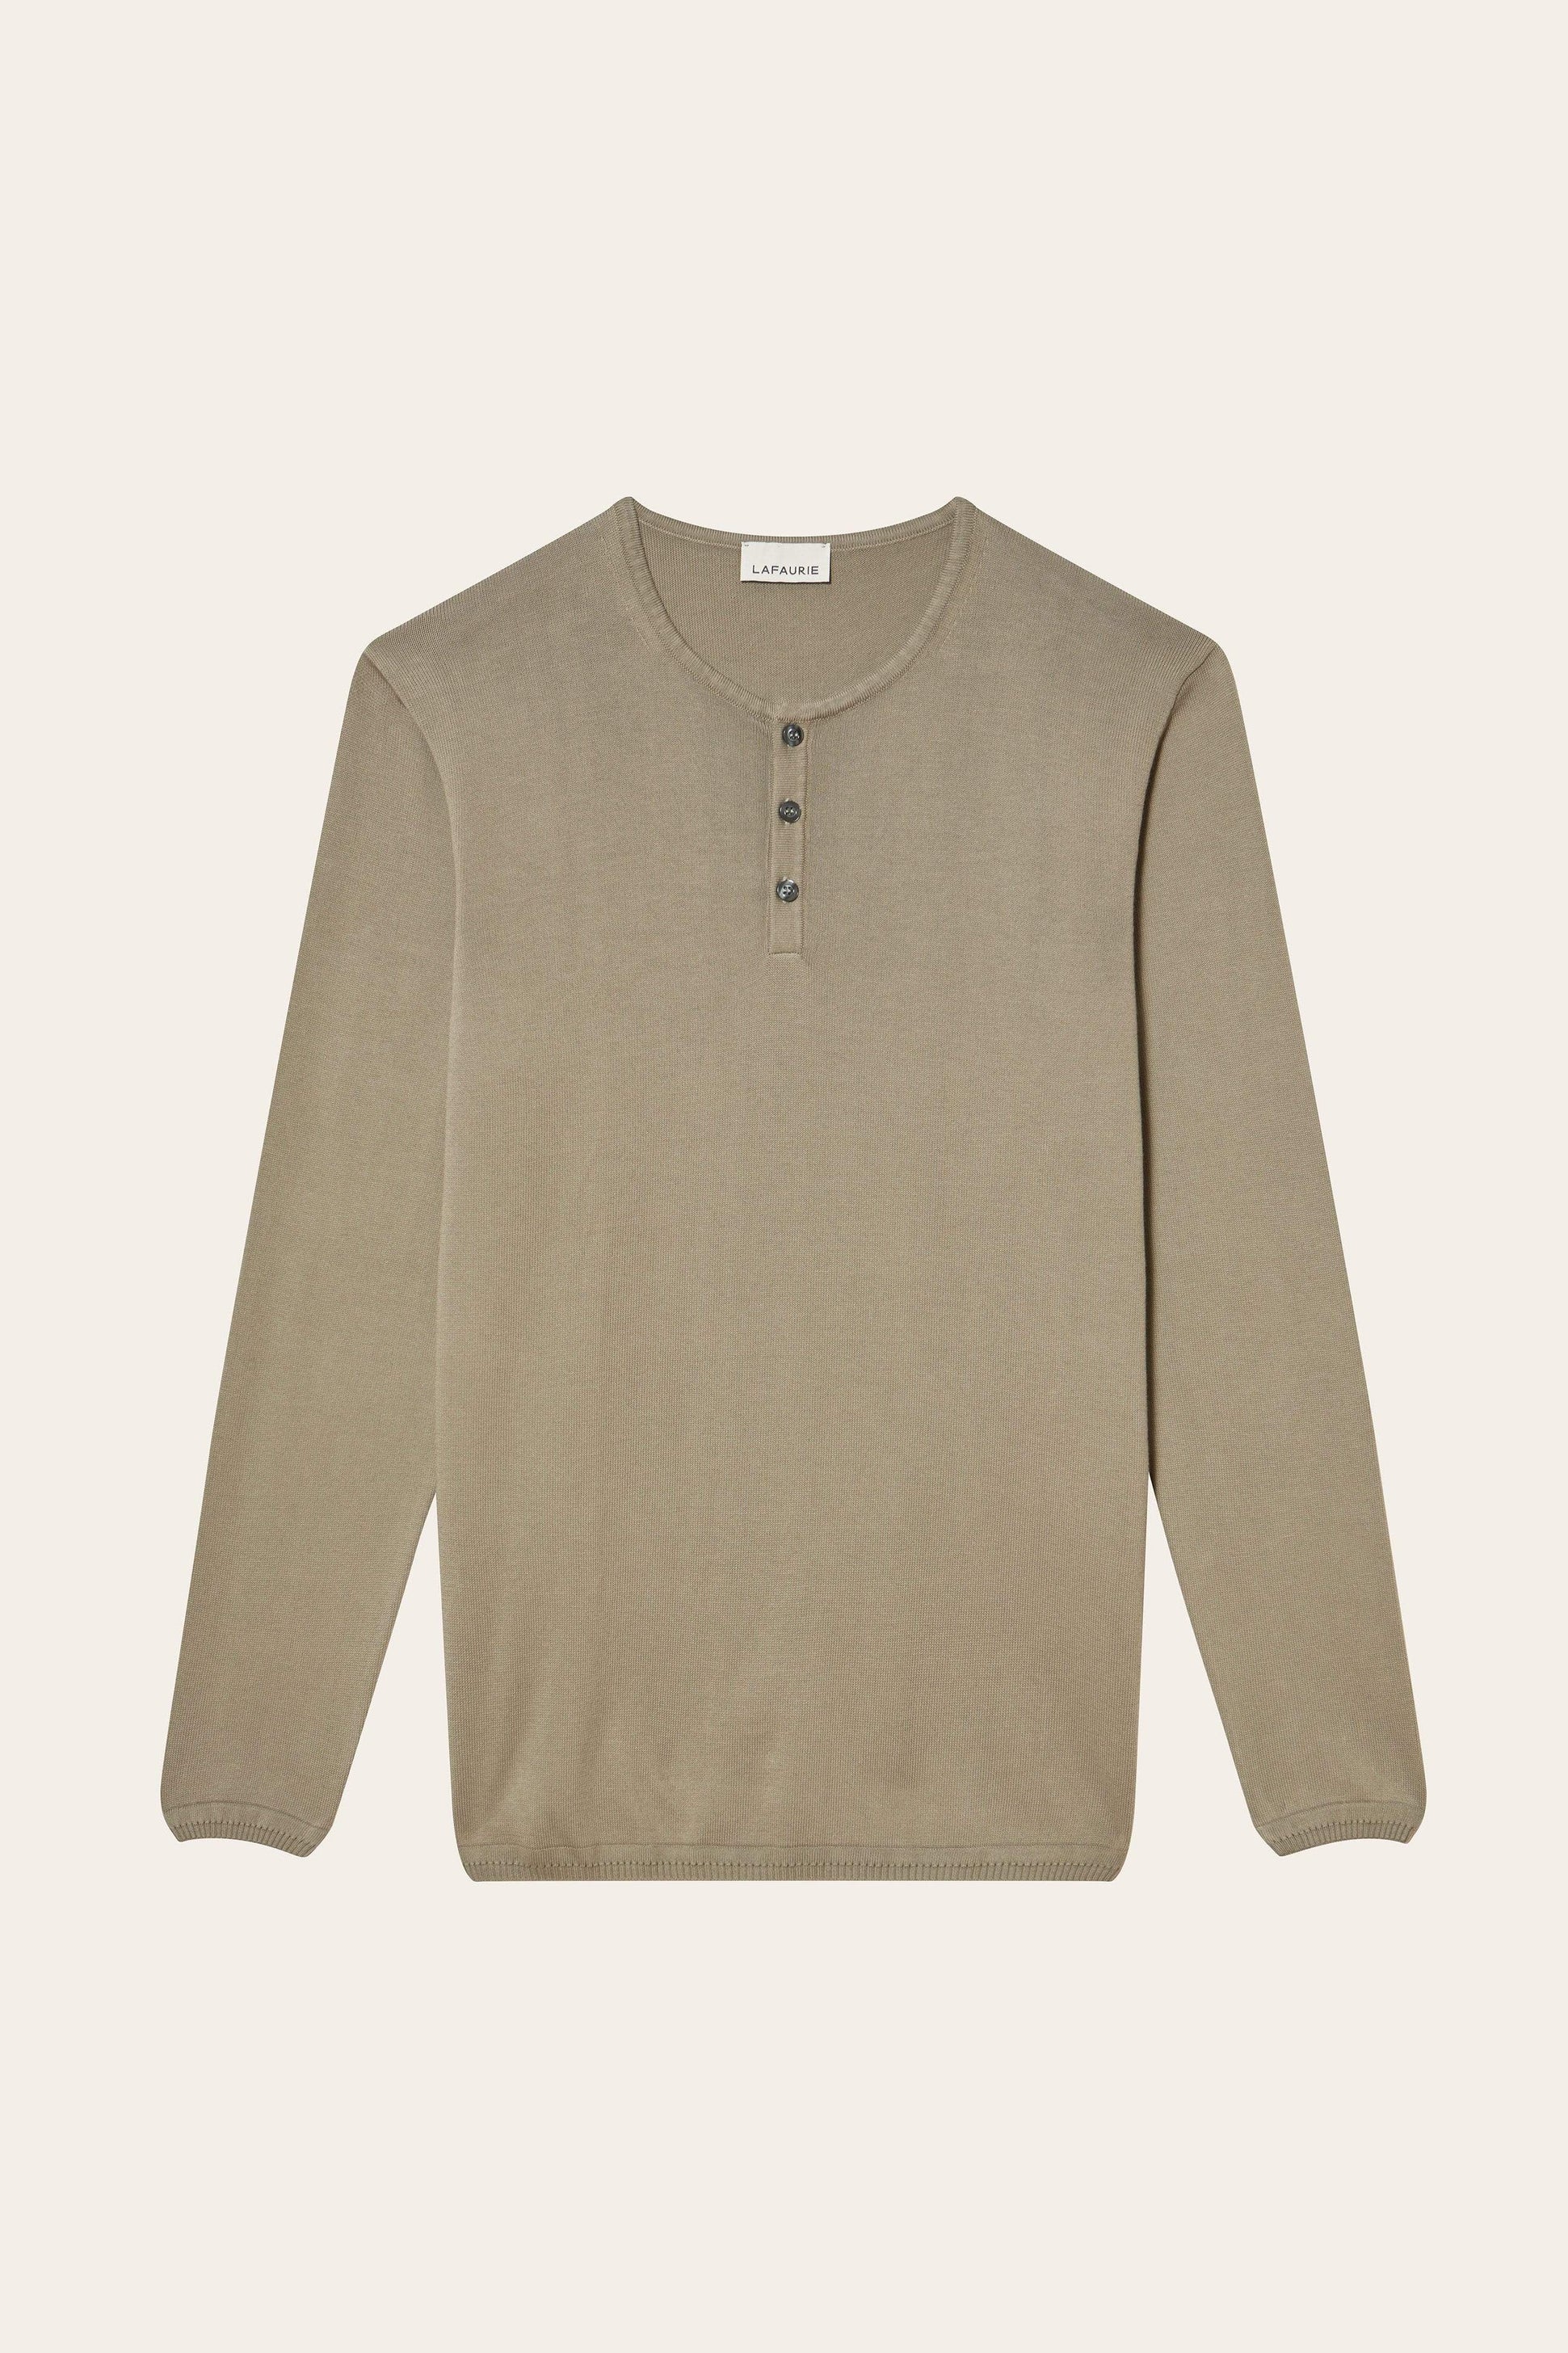 Pull Sud - Taupe - Lafaurie